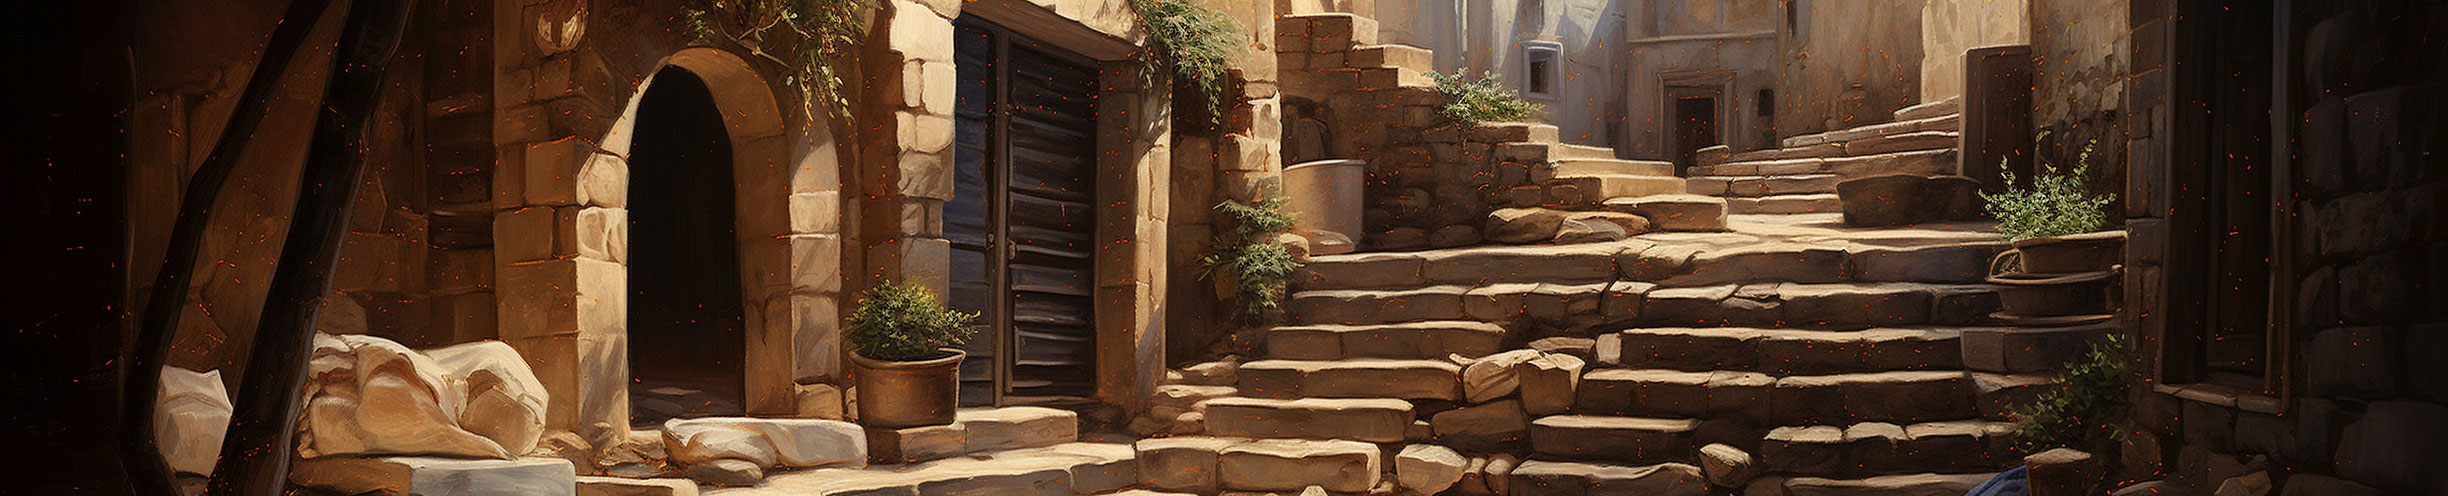 tychodreq_a_finely_detailed_oil_painting_of_a_stone_stairs_lead_f239ef4c-4a00-4eb5-bda9-777a8e7fdb67.jpg